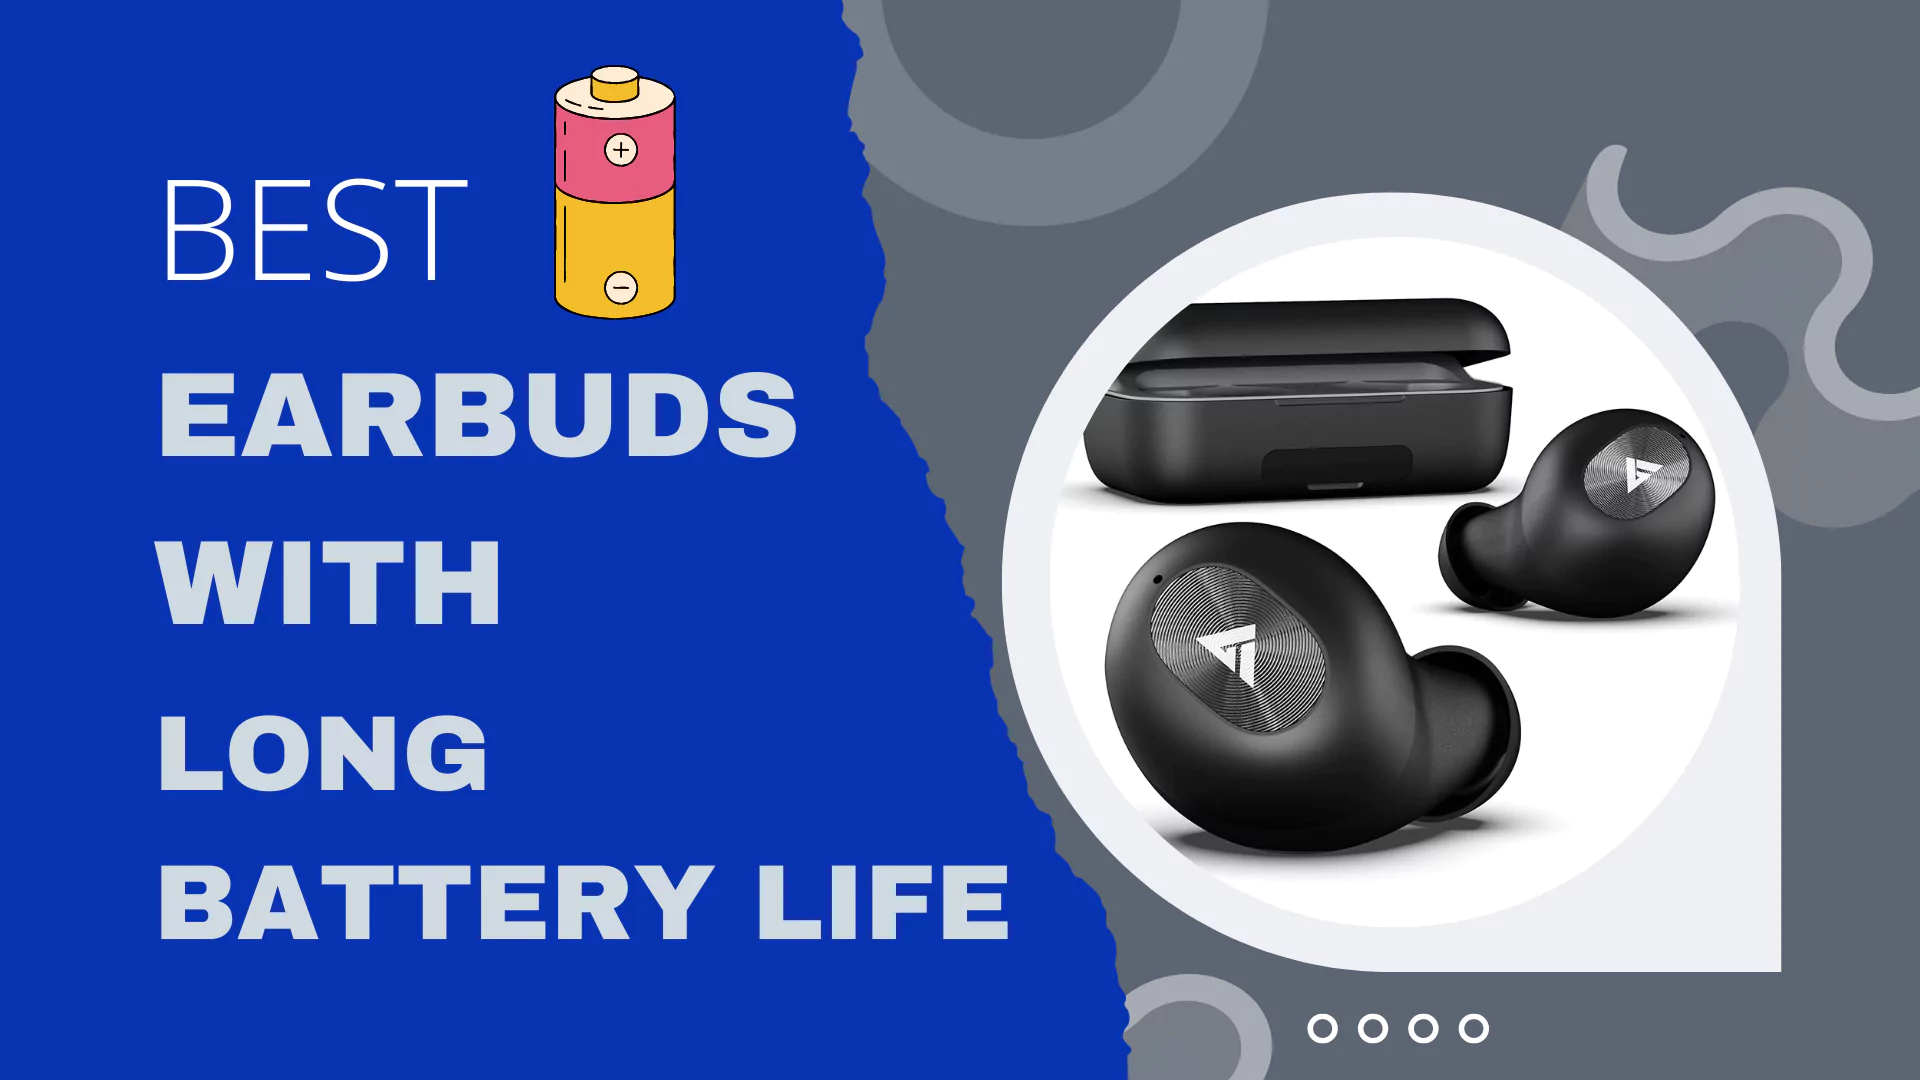 Best Earbuds with Long Battery Life